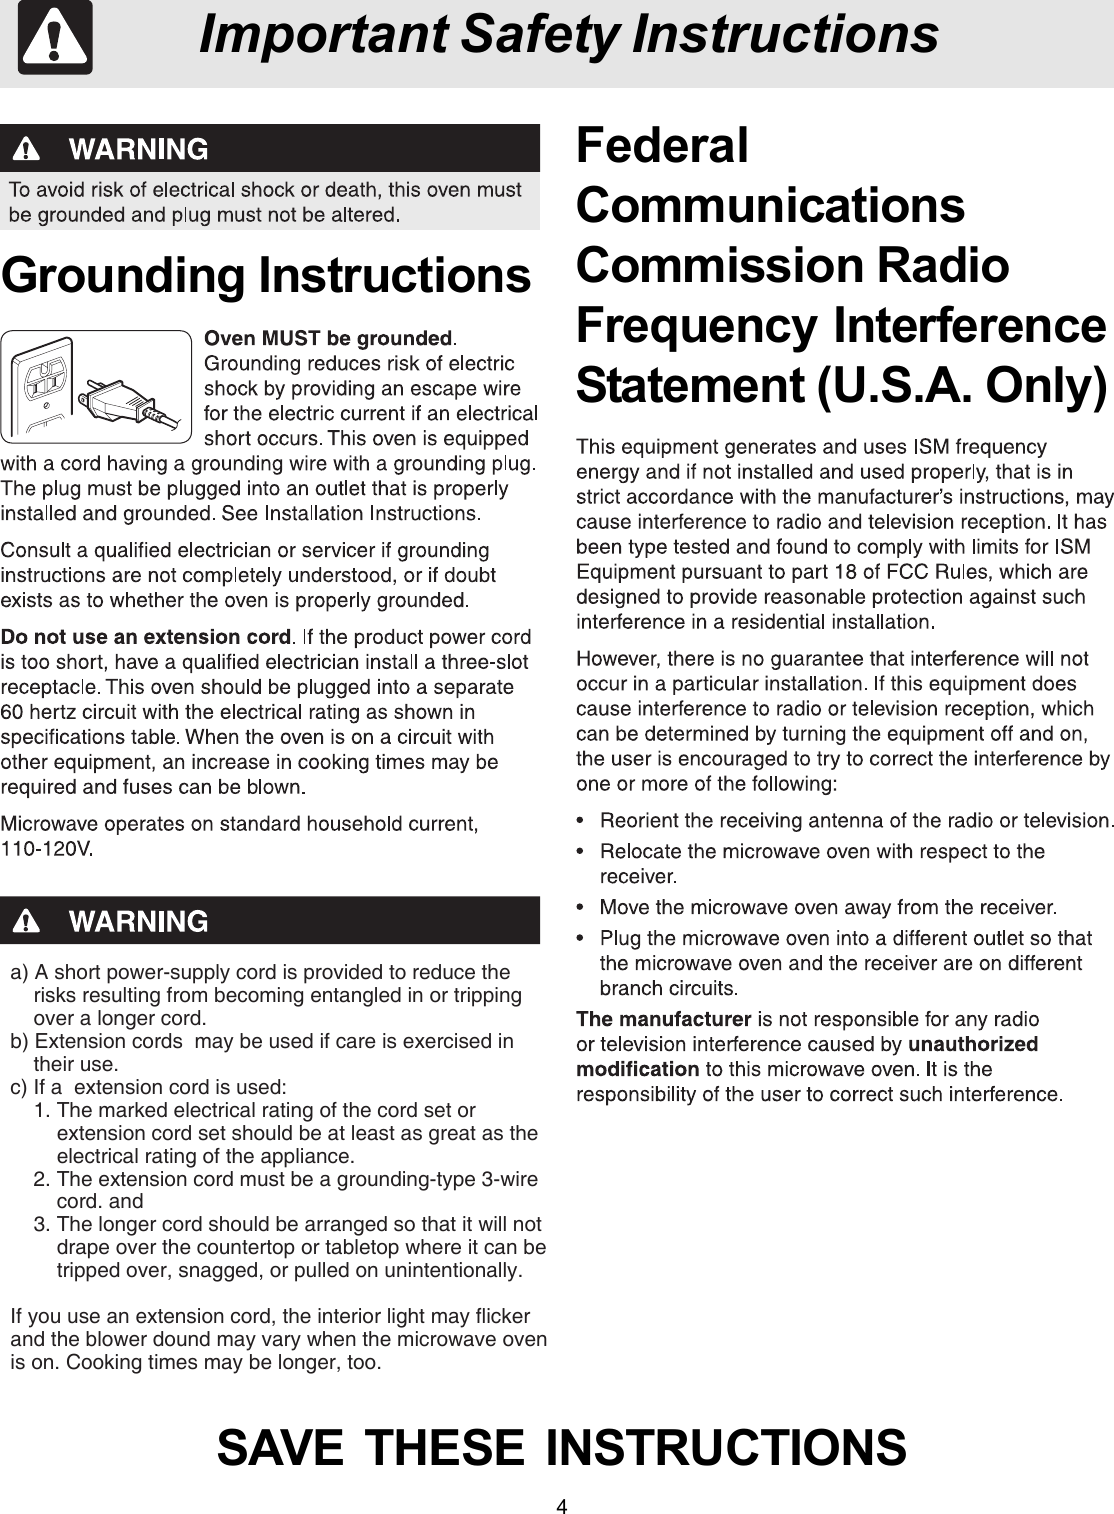 4Important Safety InstructionsGrounding InstructionsSAVE  THESE  INSTRUCTIONSFederalCommunicationsCommission RadioFrequency InterferenceStatement (U.S.A. Only)a) A short power-supply cord is provided to reduce the    risks resulting from becoming entangled in or tripping    over a longer cord.b) Extension cords  may be used if care is exercised in    their use.c) If a  extension cord is used:    1. The marked electrical rating of the cord set or        extension cord set should be at least as great as the        electrical rating of the appliance.    2. The extension cord must be a grounding-type 3-wire        cord. and    3. The longer cord should be arranged so that it will not        drape over the countertop or tabletop where it can be        tripped over, snagged, or pulled on unintentionally.If you use an extension cord, the interior light may flickerand the blower dound may vary when the microwave ovenis on. Cooking times may be longer, too.